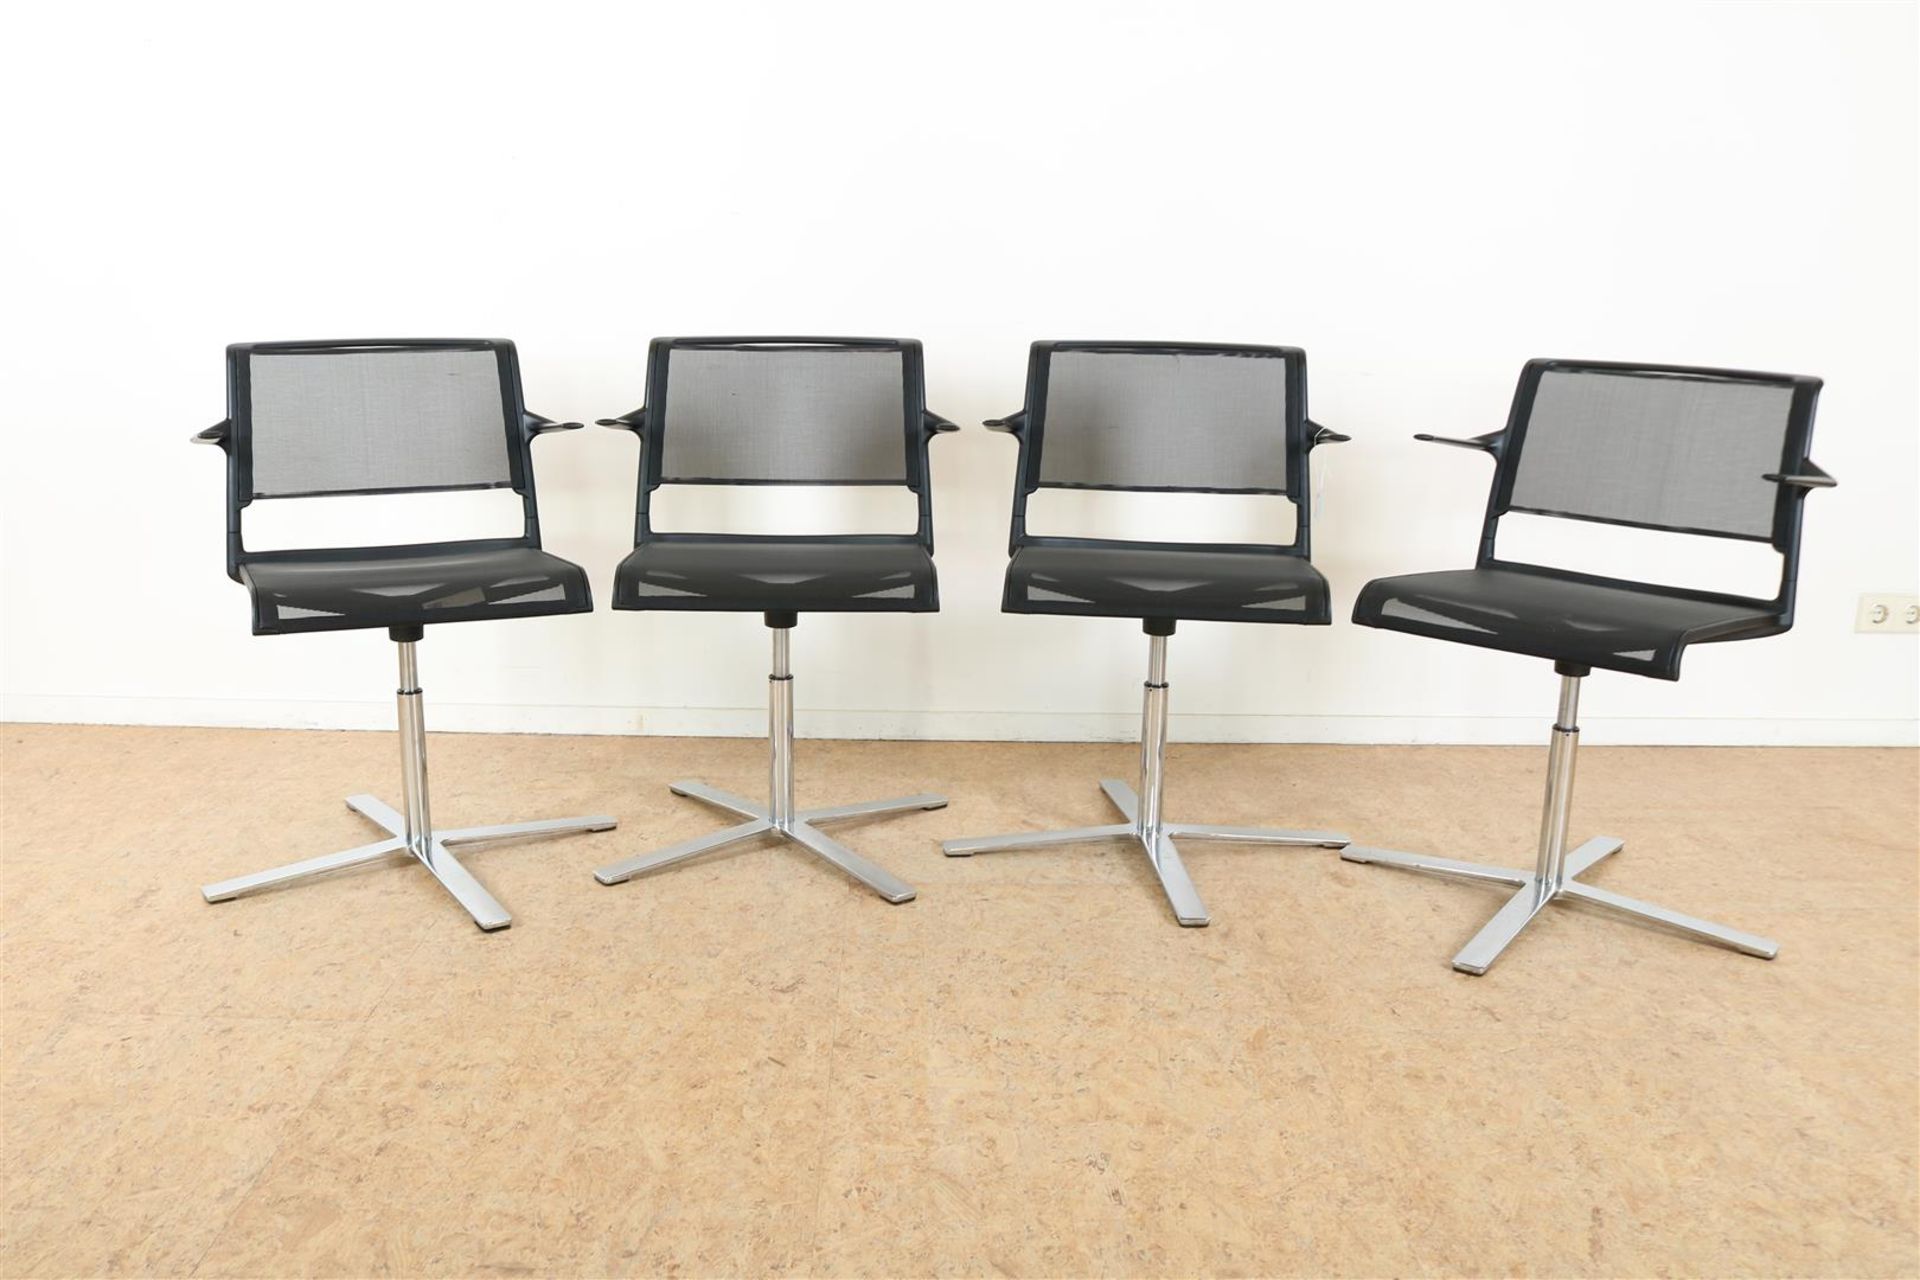 Series of 4 armchairs with black polyester mesh upholstered on chrome-plated swivel base, label